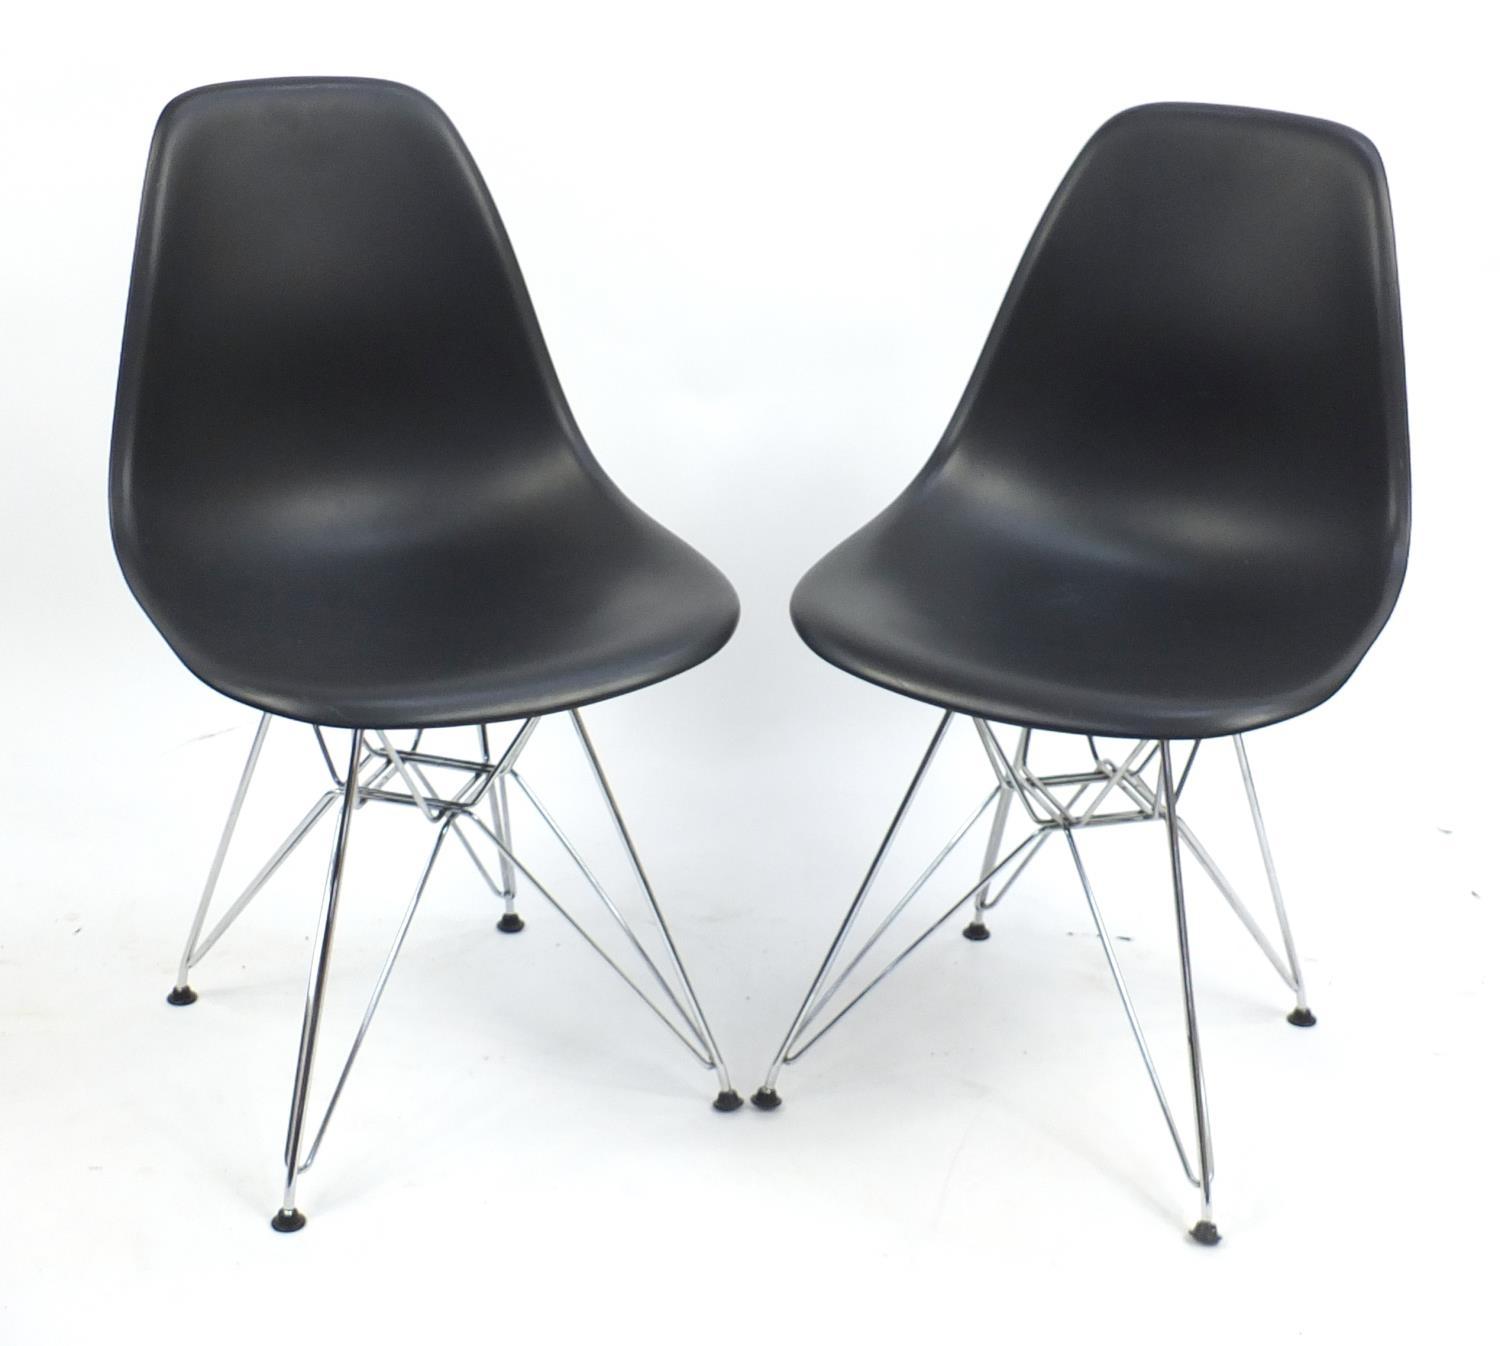 Pair of Vitra chairs designed by Charles Eames, each 80cm high : For Further Condition Reports,